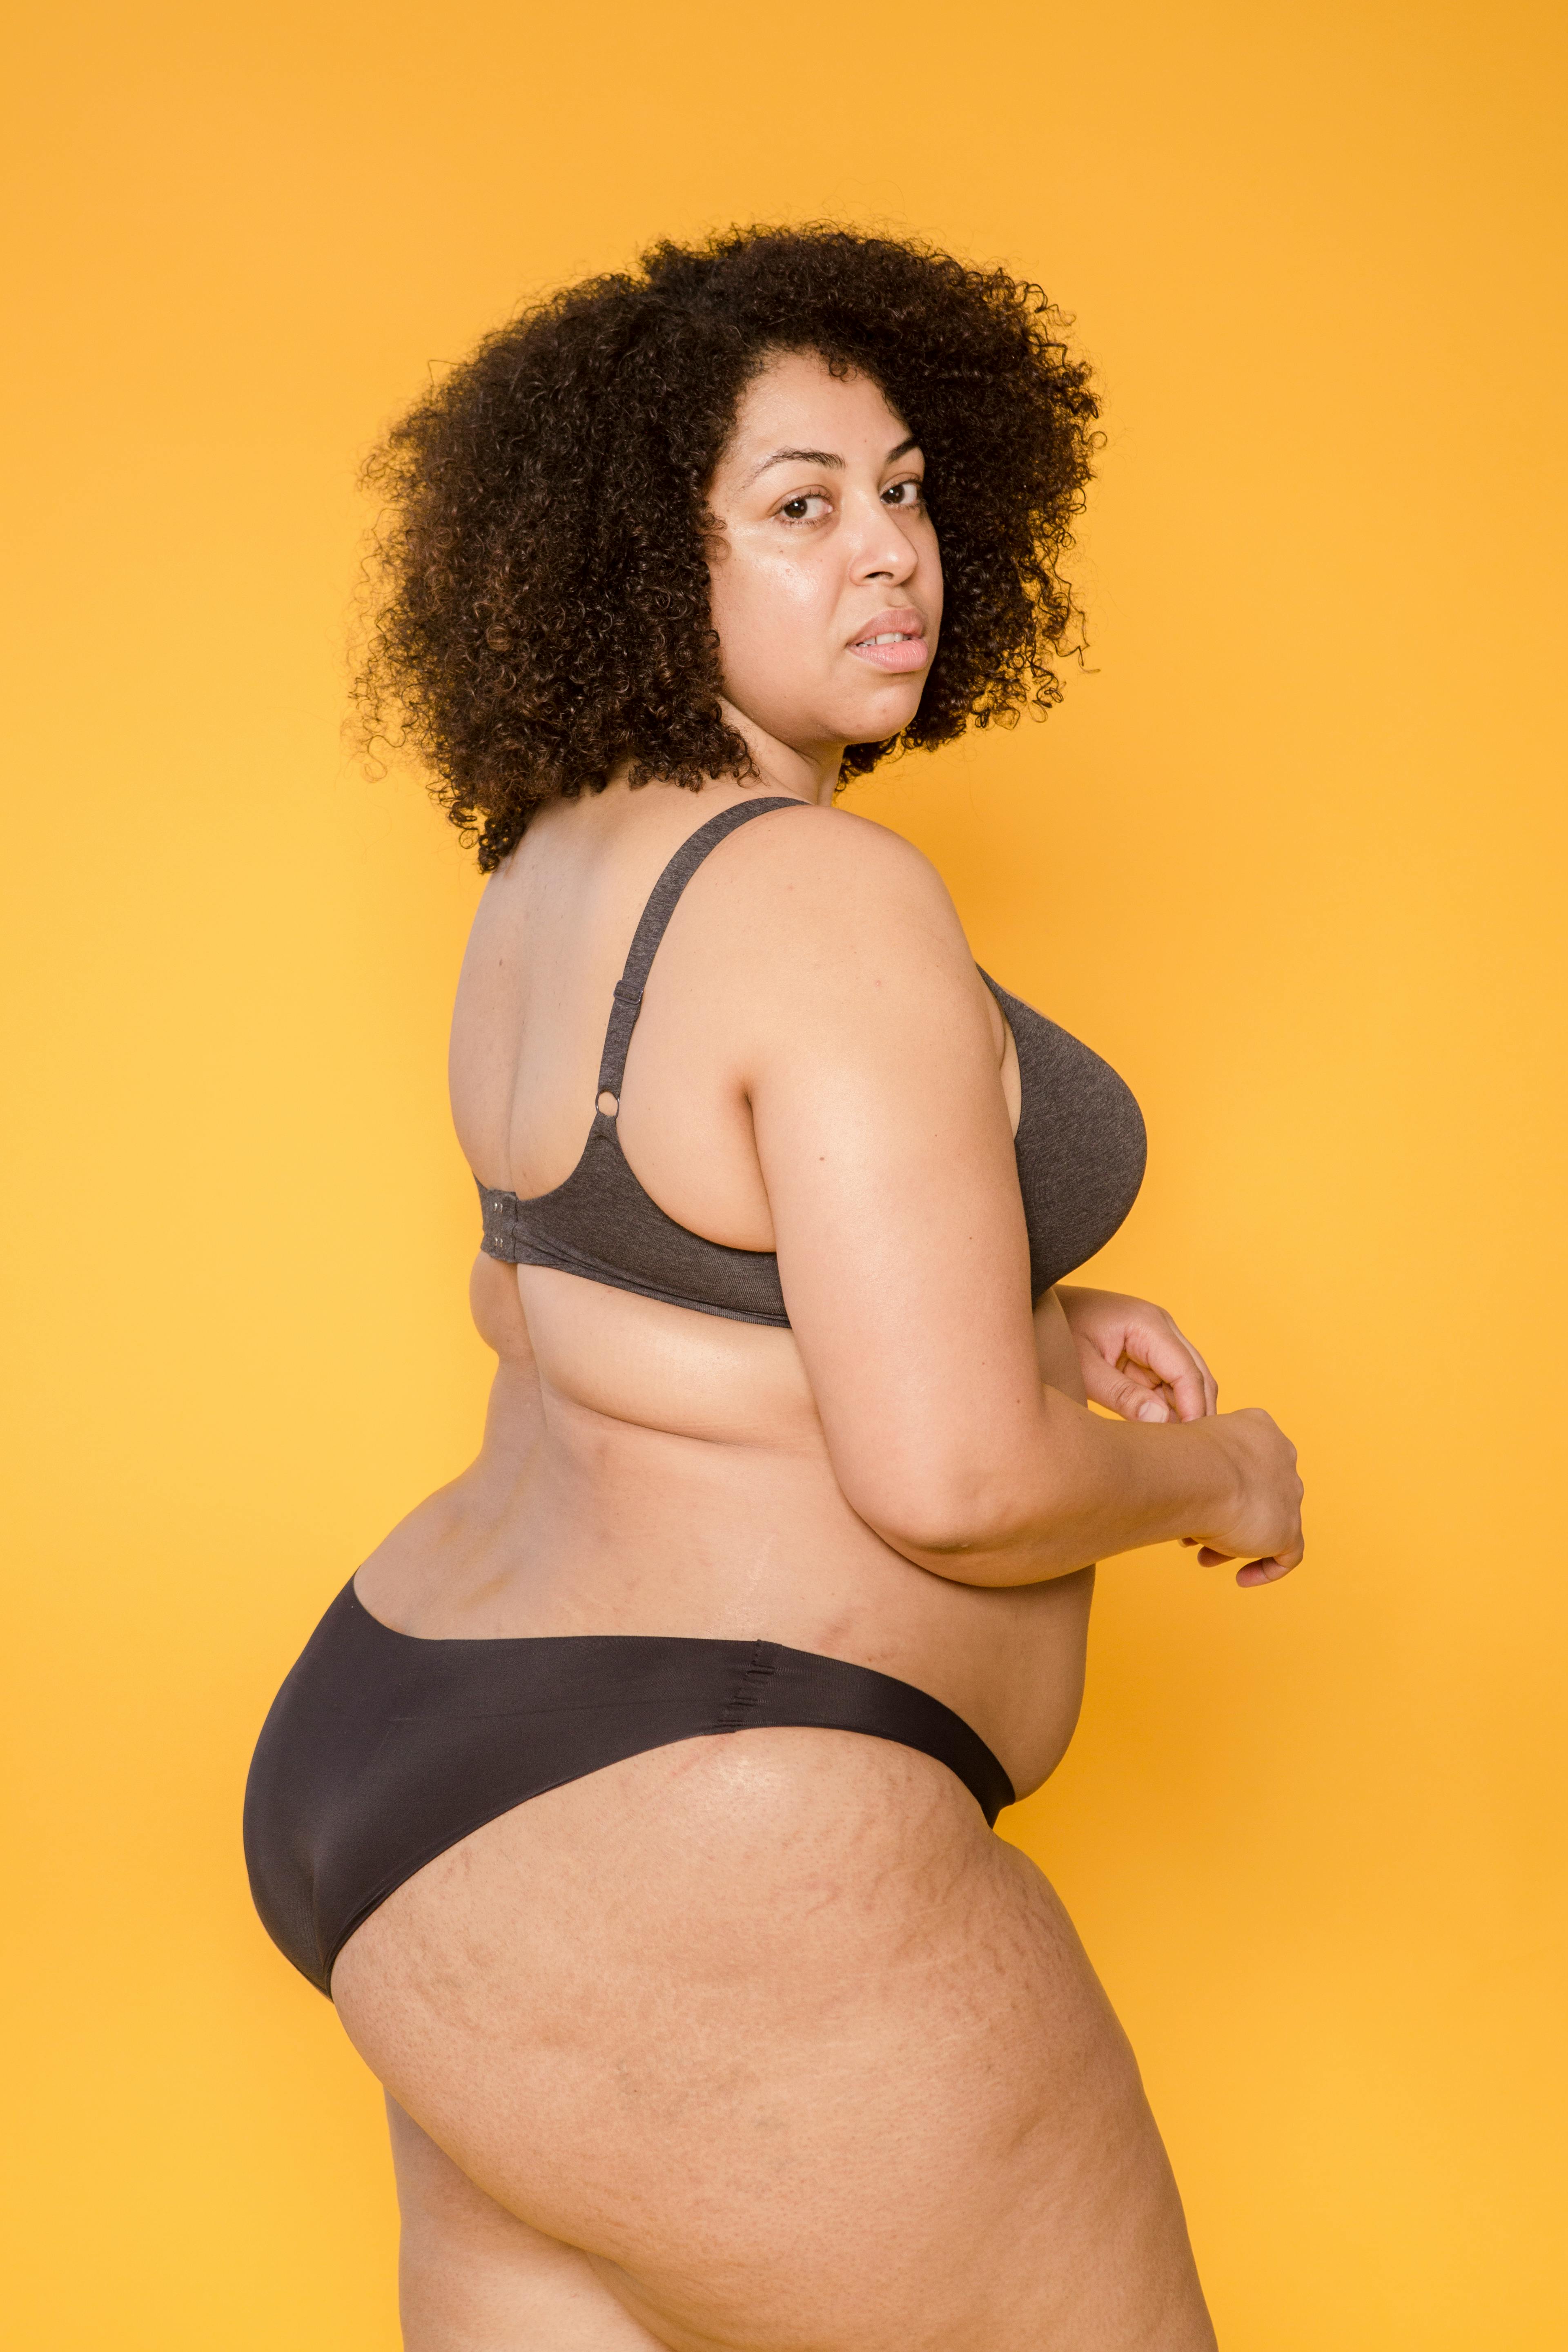 Obese woman in her underwear - Stock Image - C011/6691 - Science Photo  Library